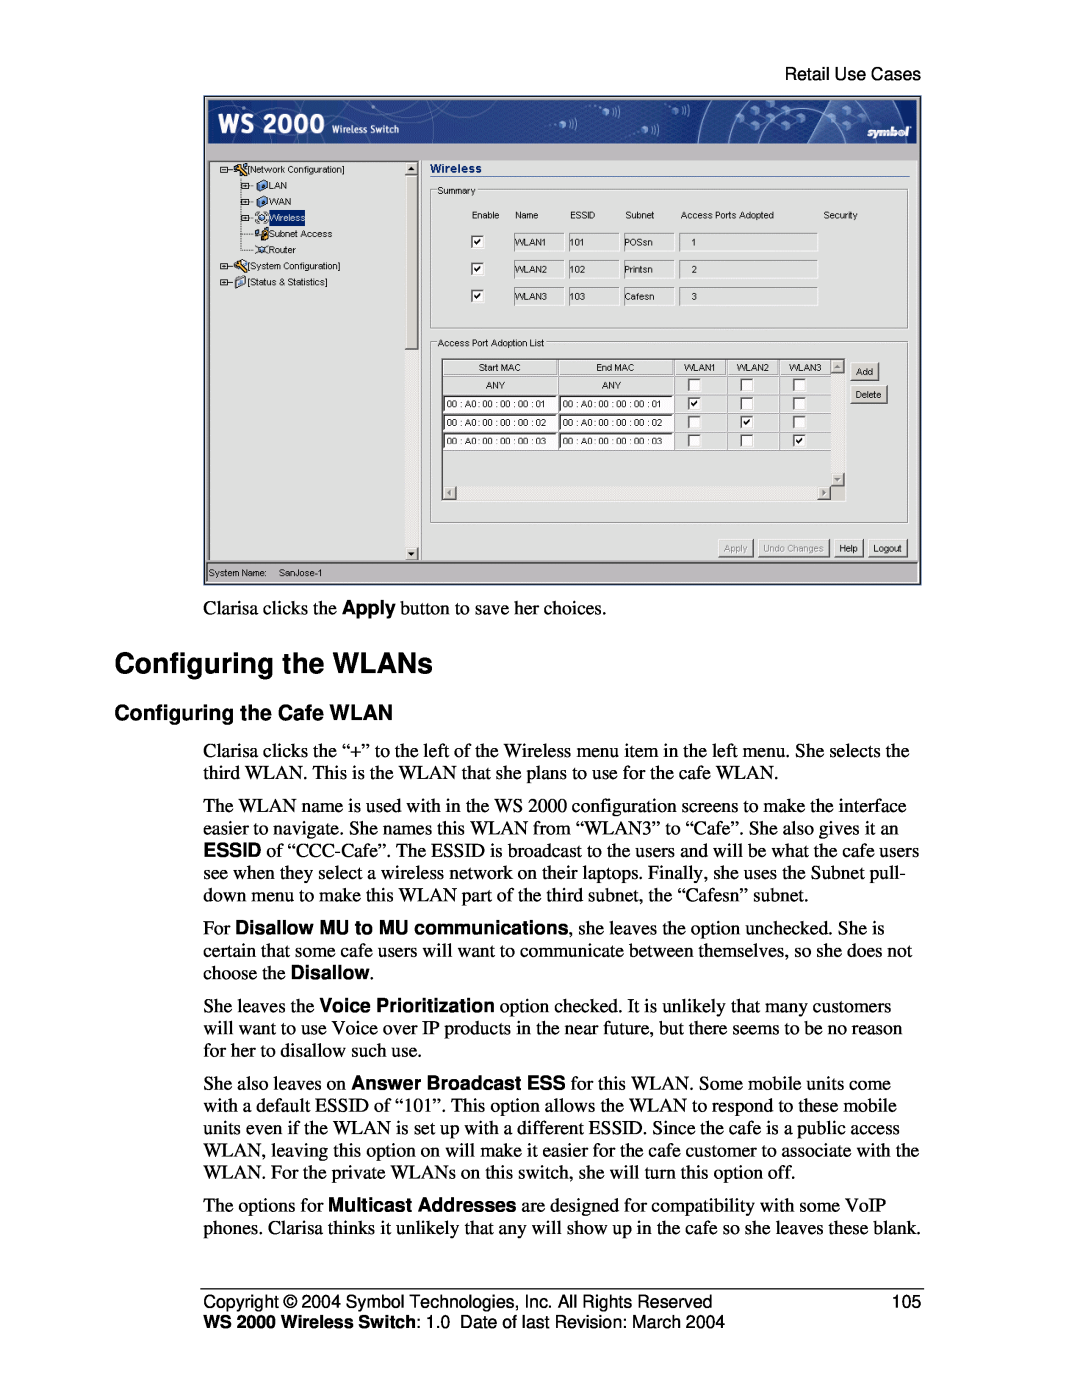 Symbol Technologies WS 2000 manual Configuring the WLANs, Configuring the Cafe WLAN 